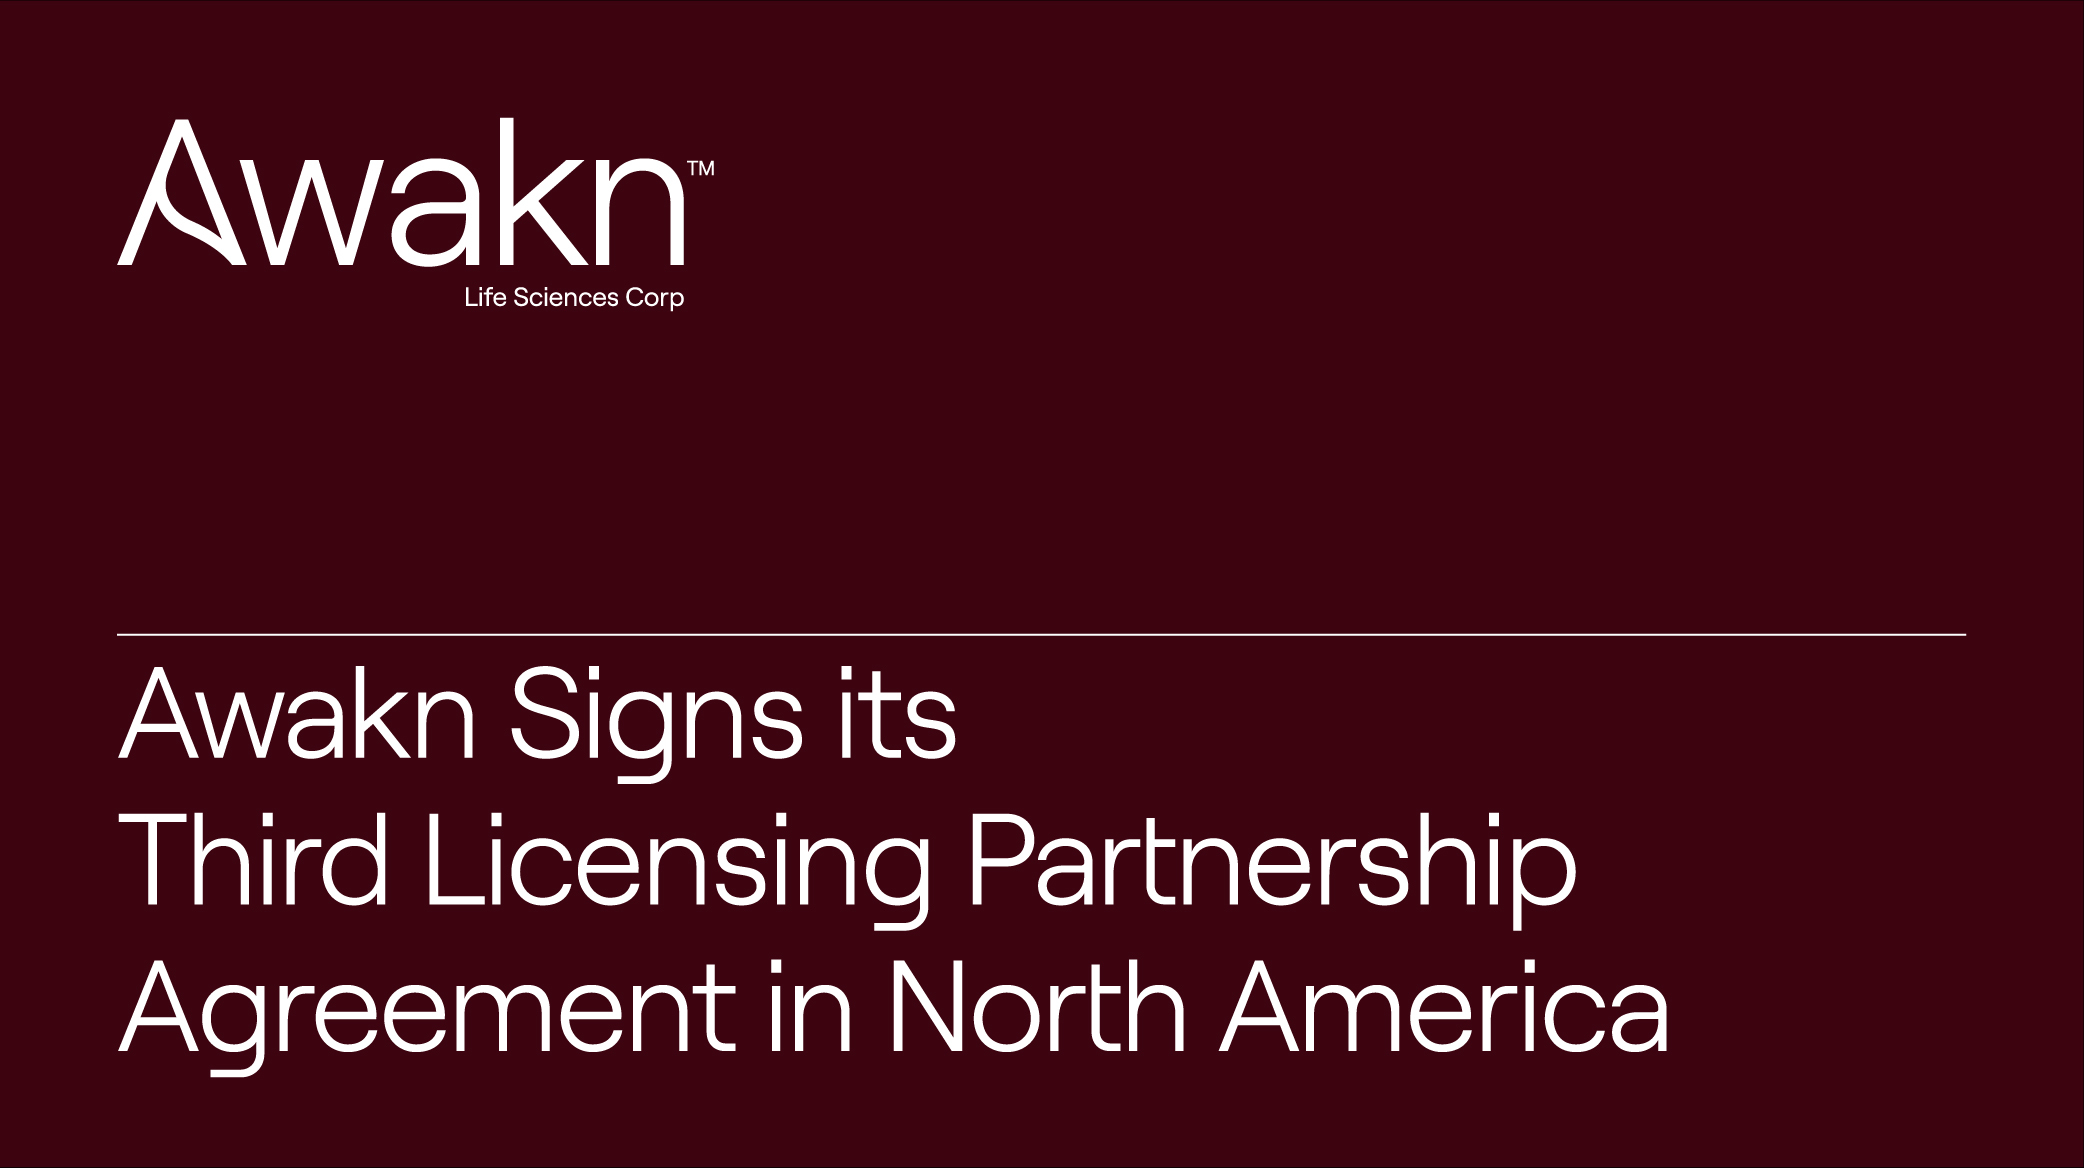 Awakn Life Sciences Signs Its Third Licensing Partnership Agreement In North America, And First In New York